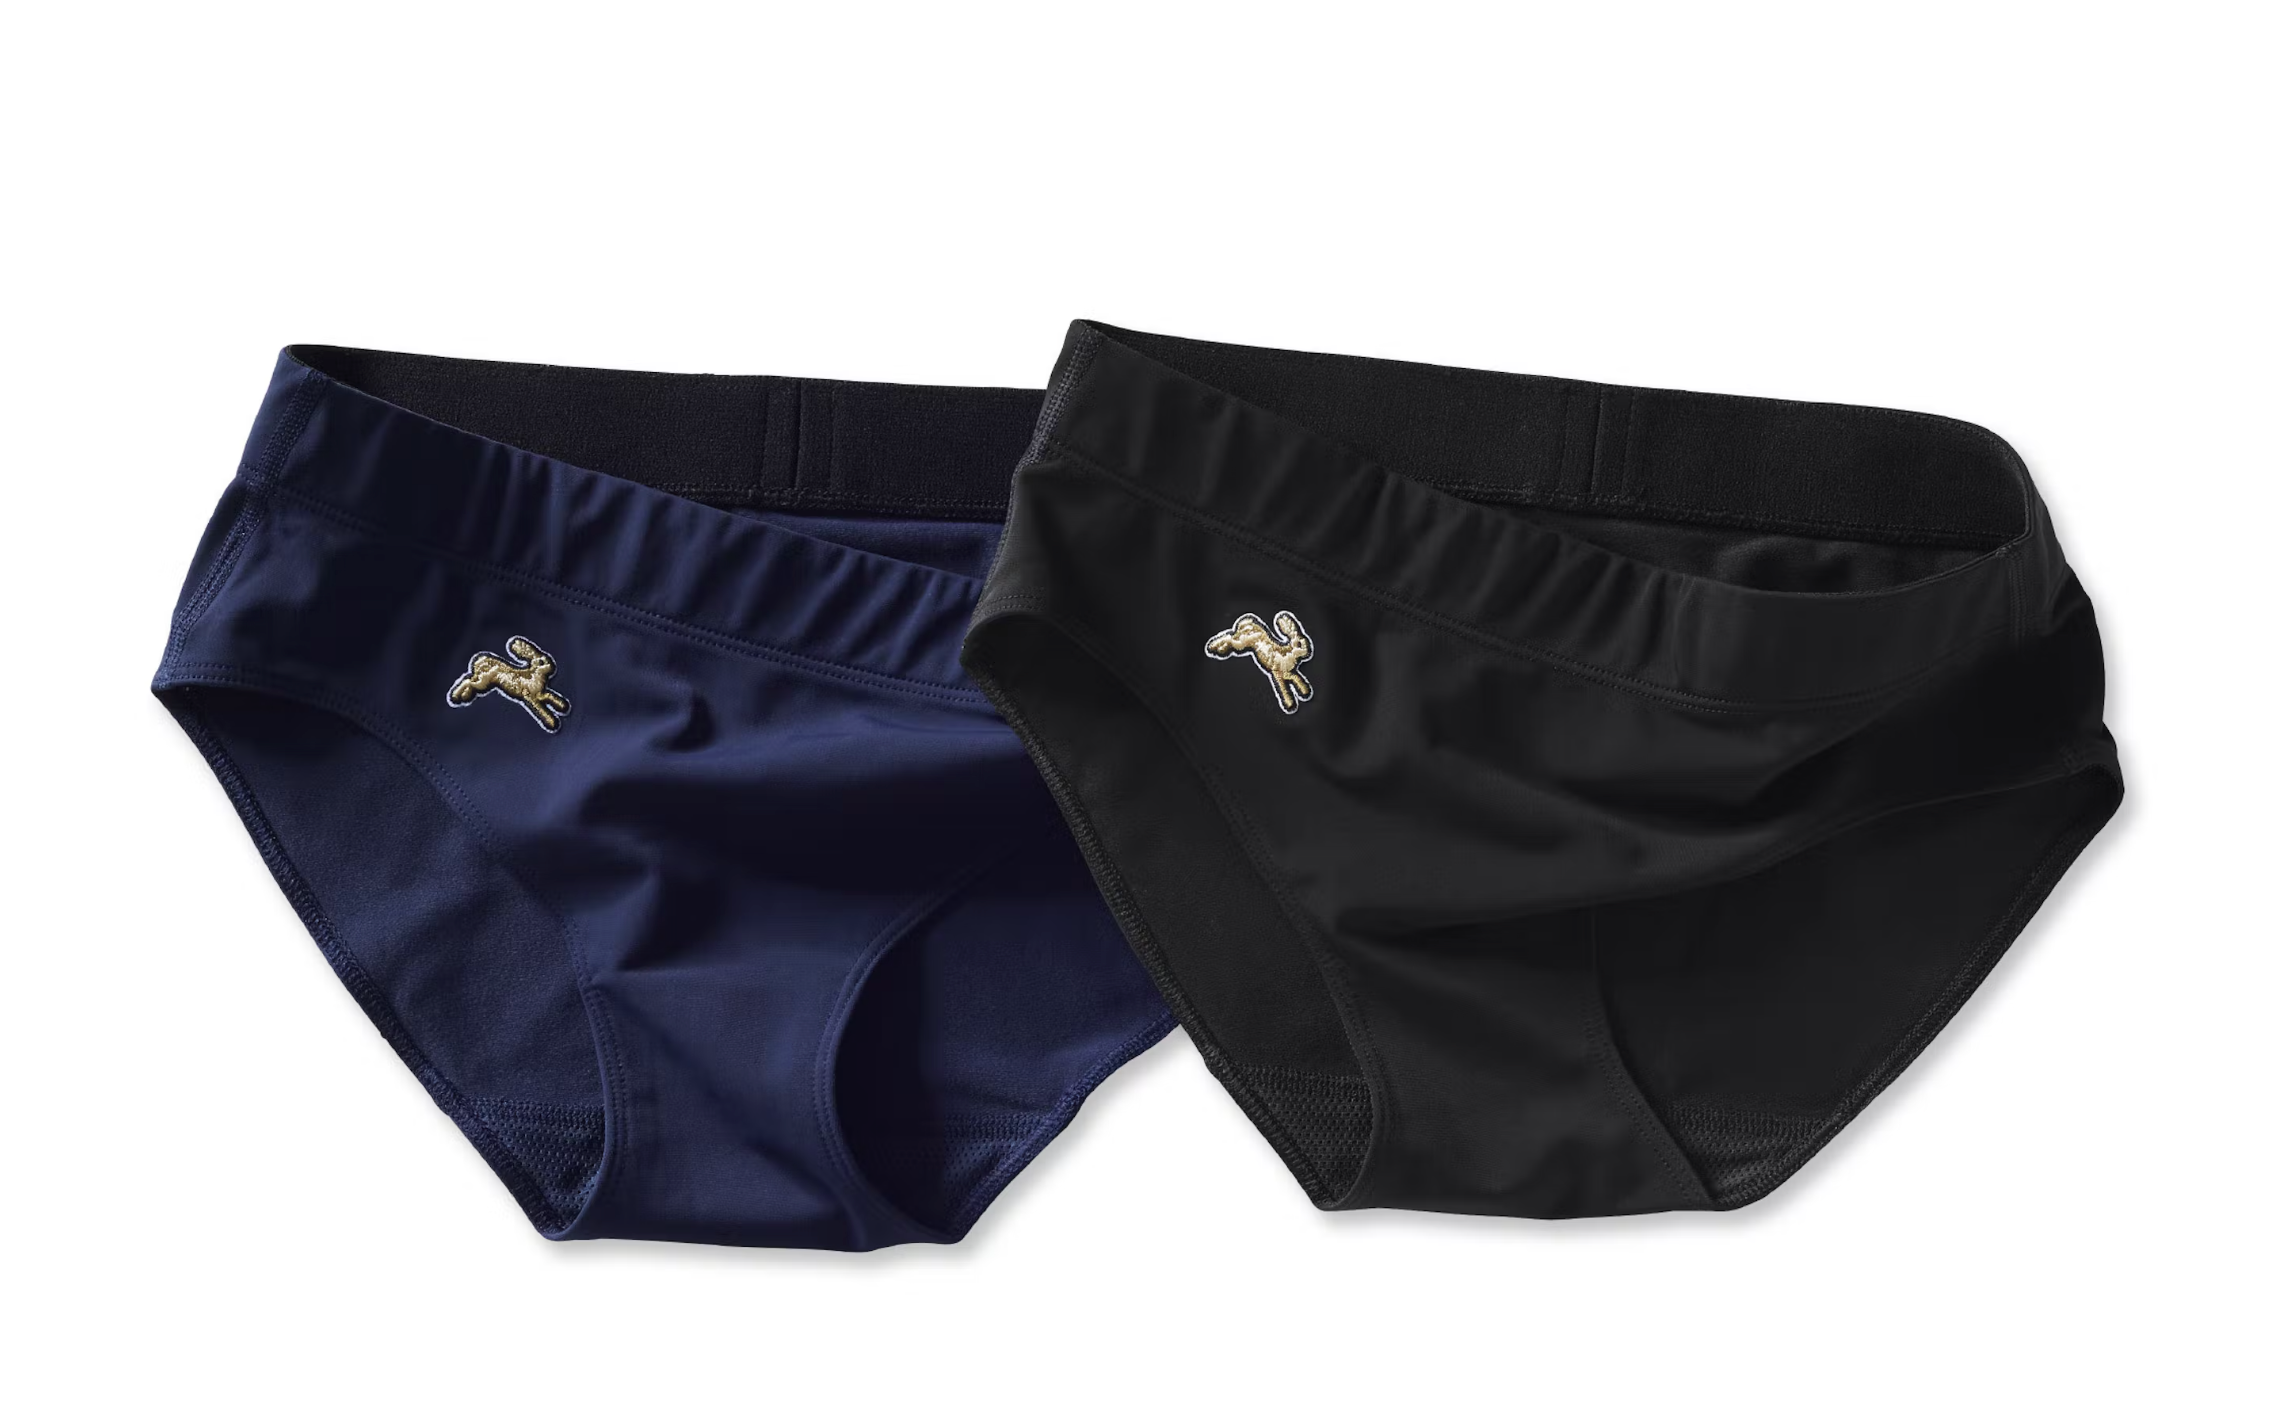 Racing Brief in Black and Gold